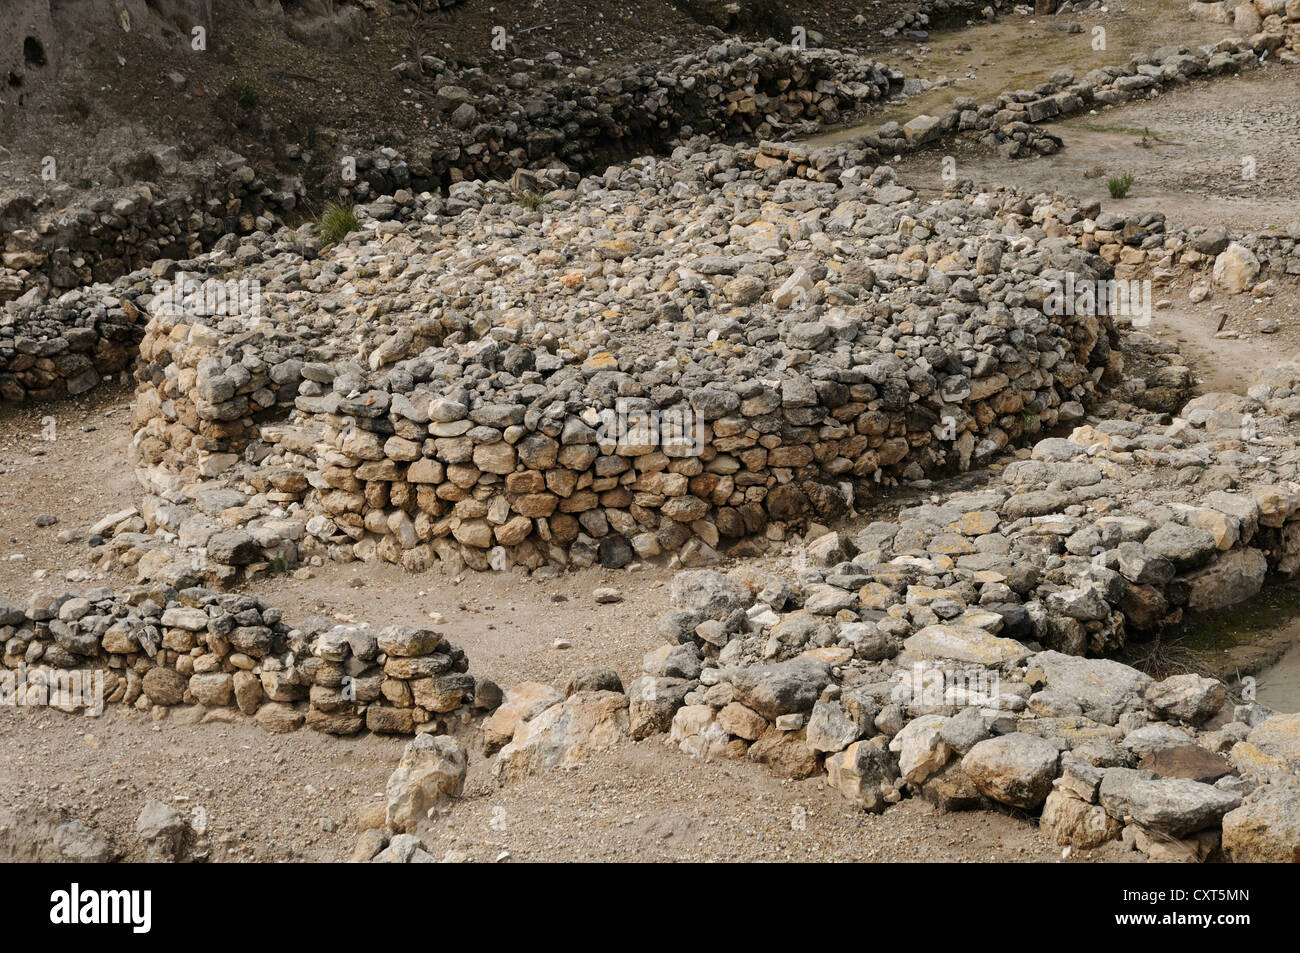 Remains of an altar, archaeological site of Megiddo, Israel, Middle East Stock Photo